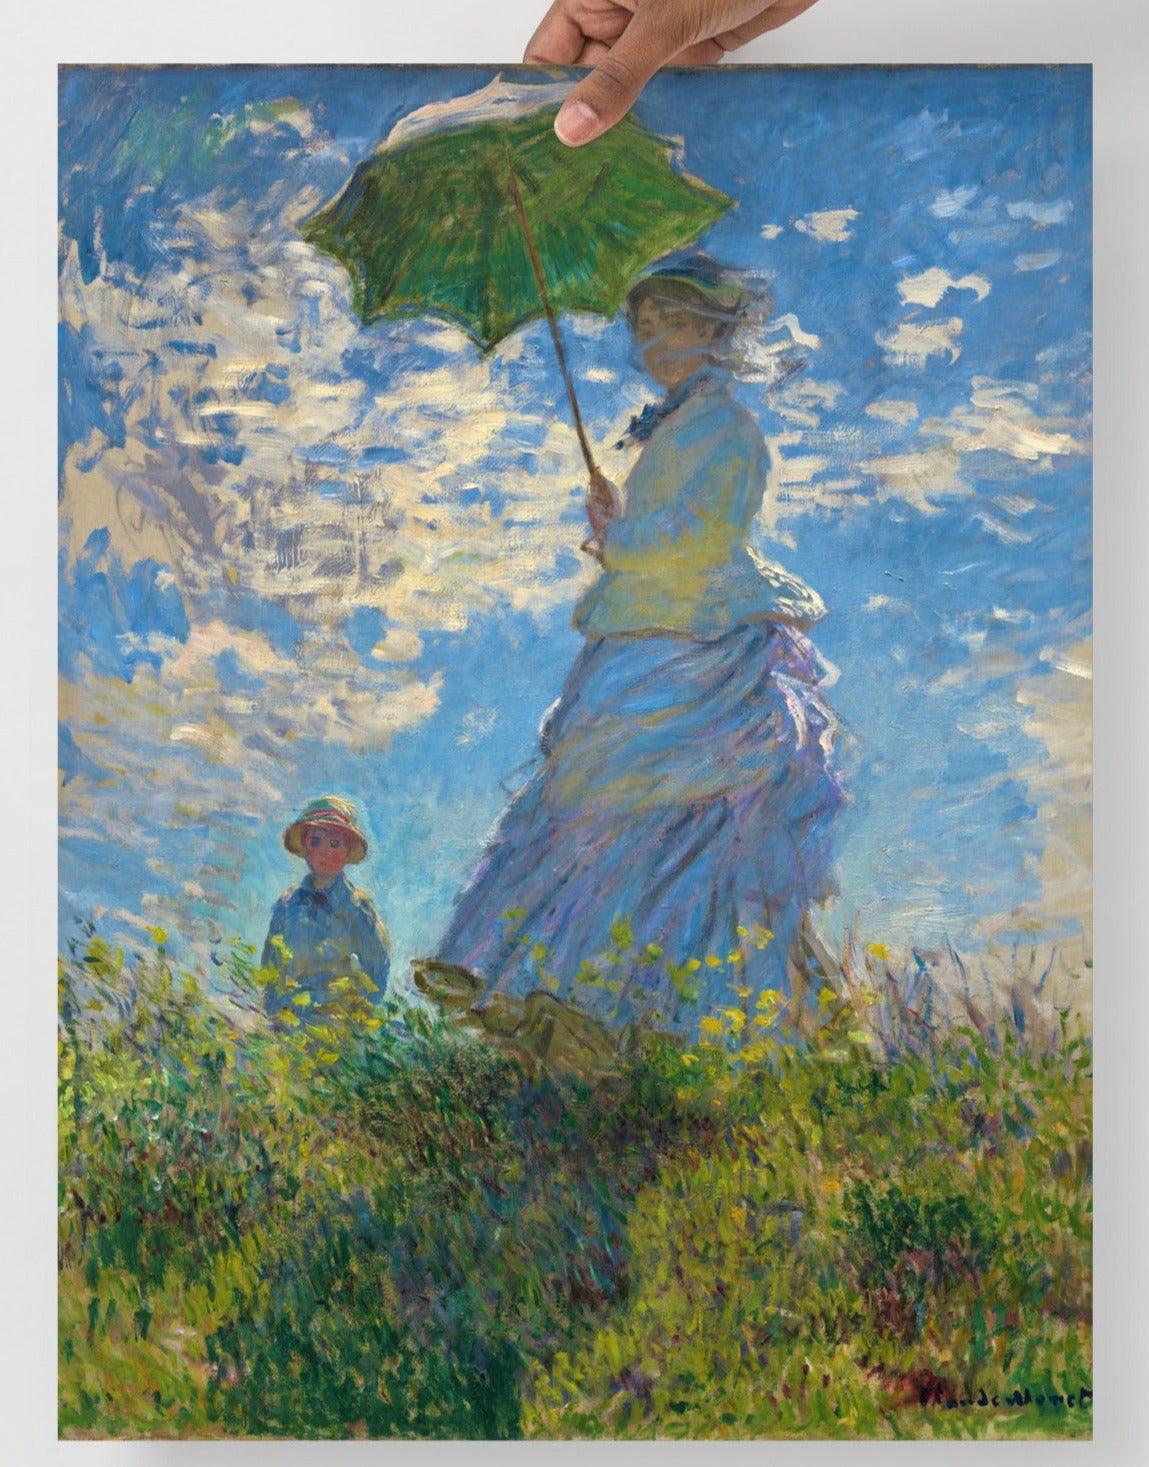 A Madame Monet and Her Son by Claude Monet  poster on a plain backdrop in size 18x24”.